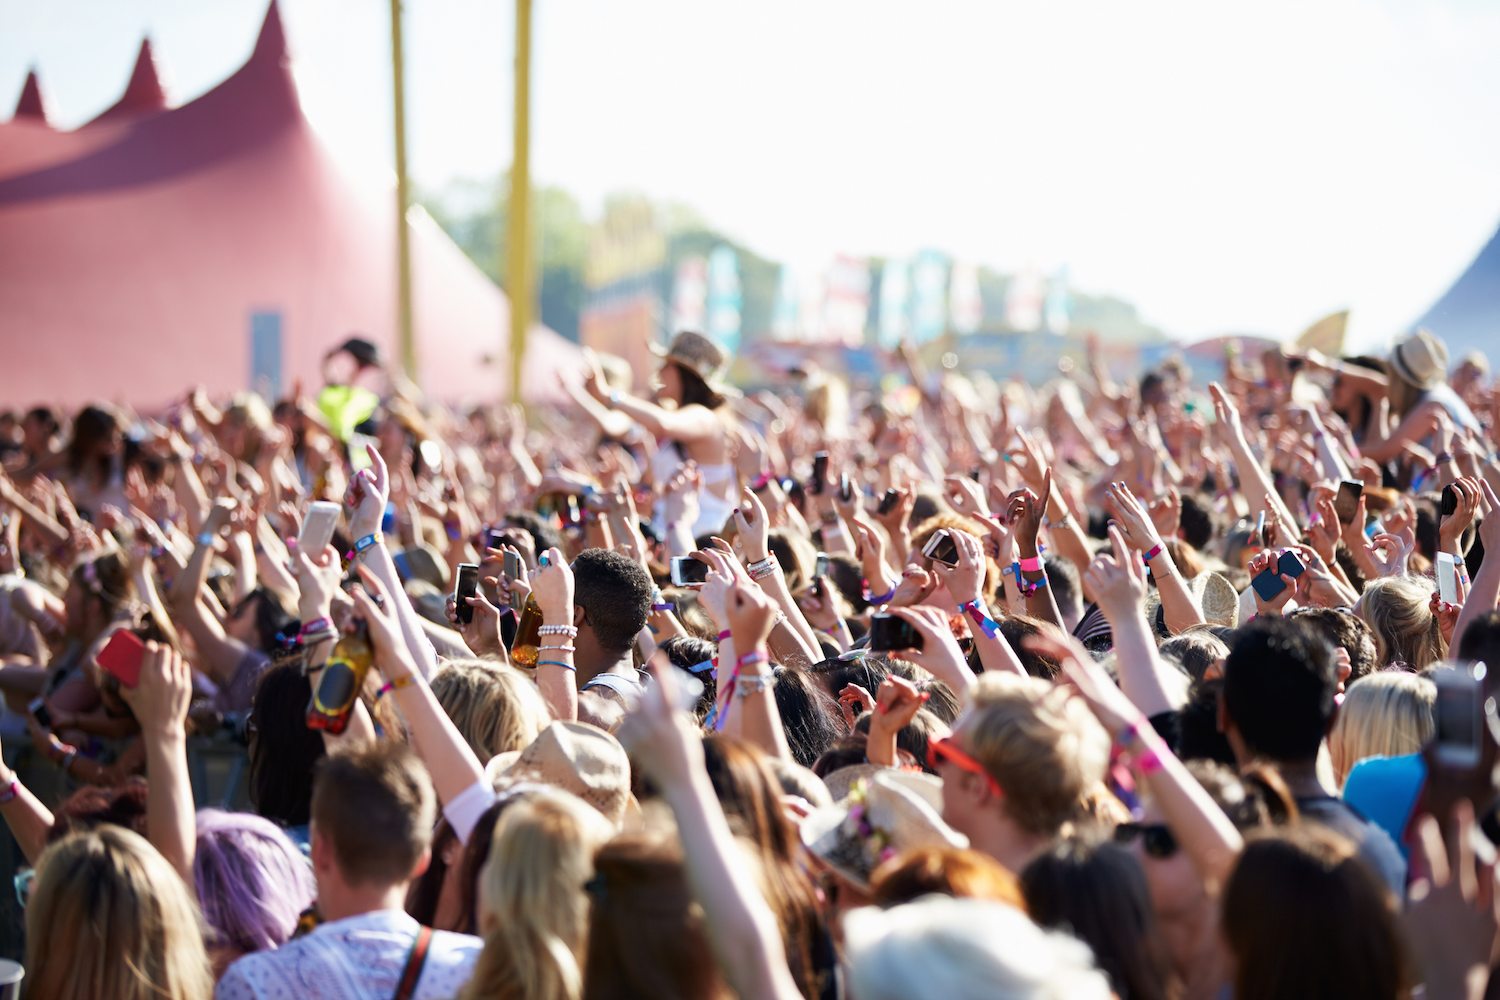 Guide to Attending an Outdoor Music Festival